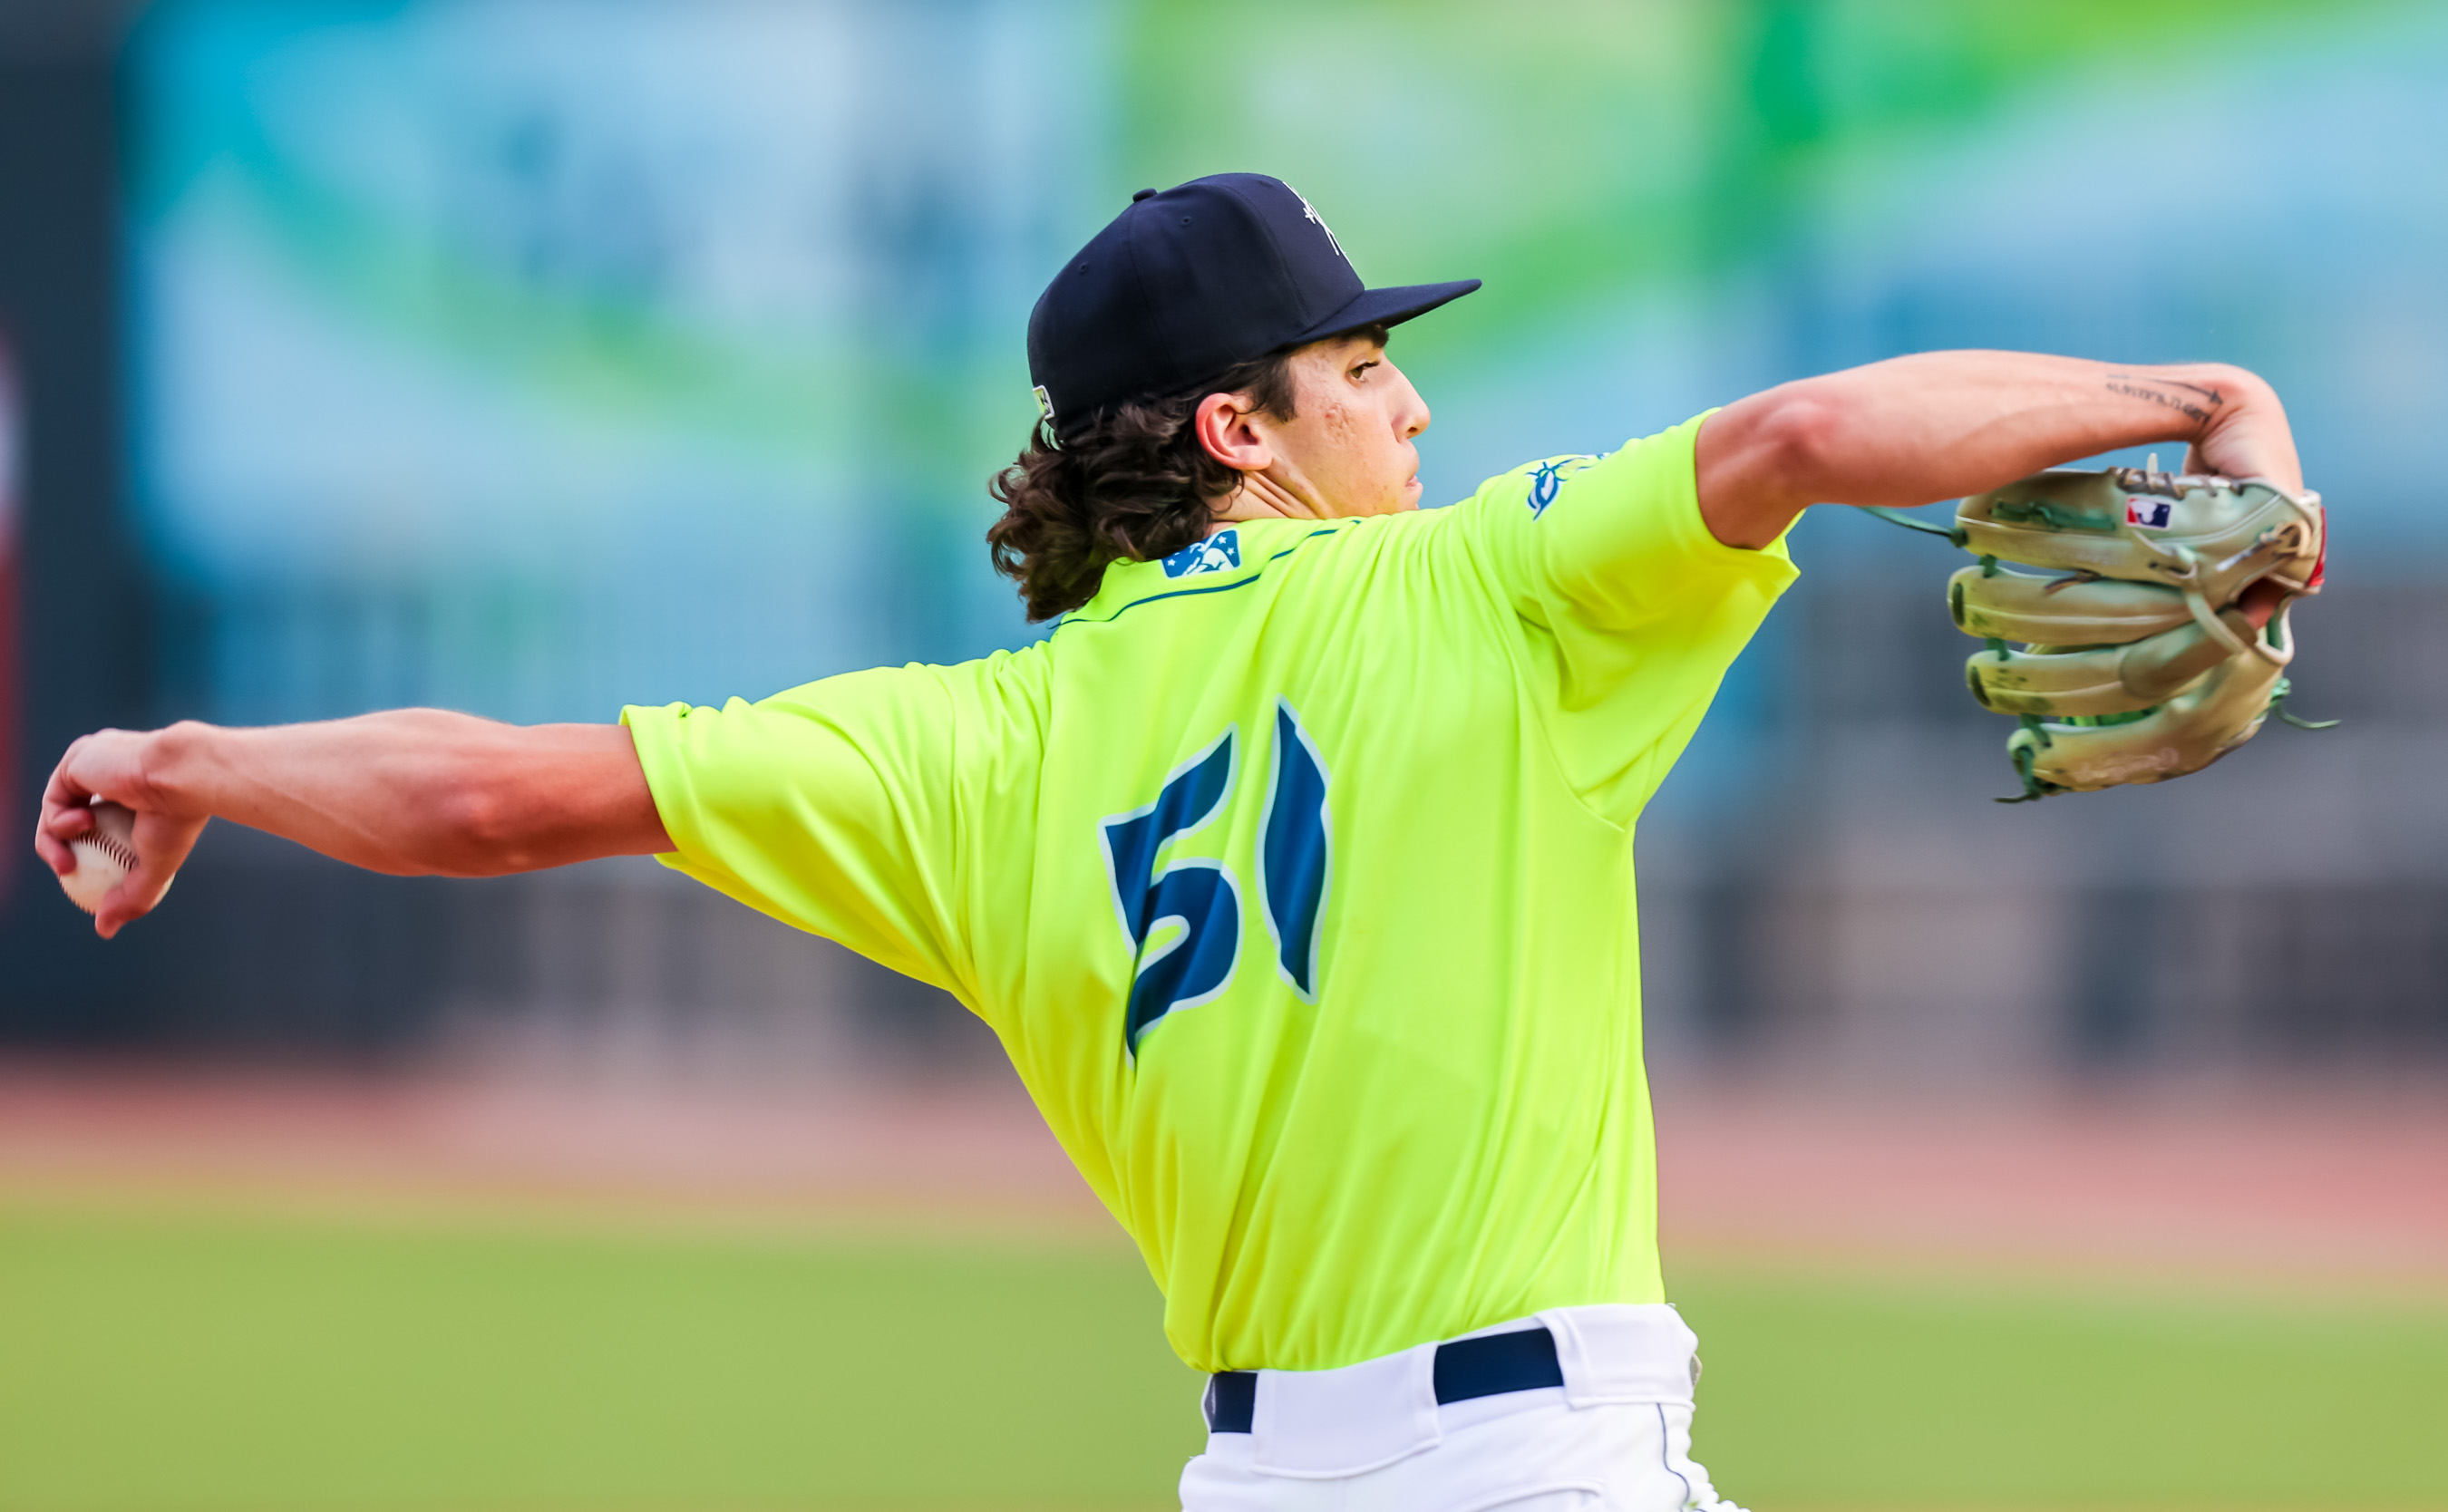 Royals first round pick Frank Mozzicato pitching with the Columbia Fireflies